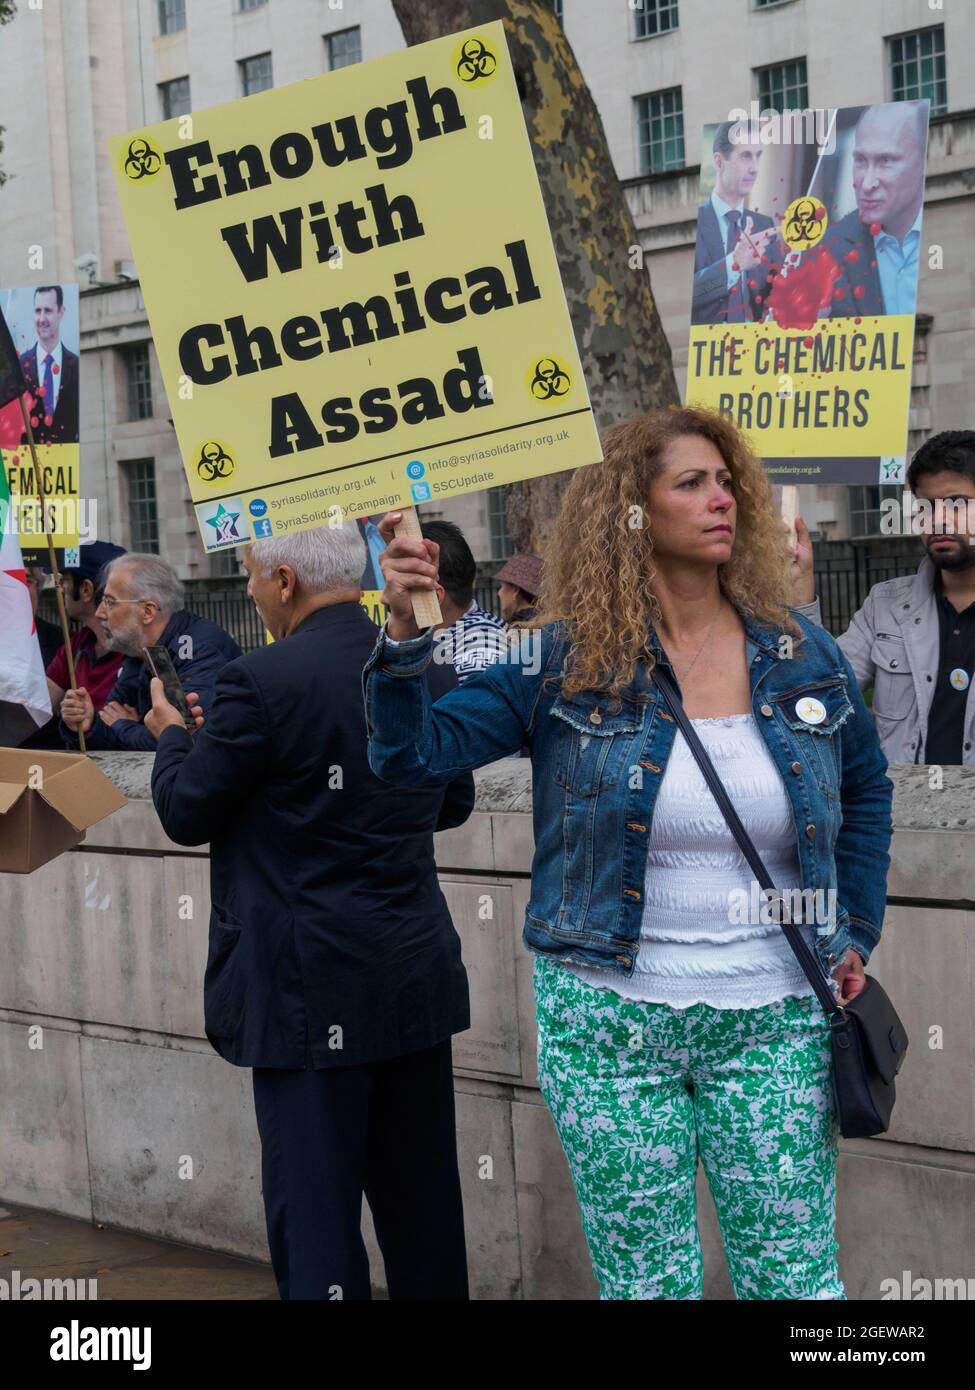 London, UK. 21st August 2921. Syrians came to Downing St on the 8th  anniversary to demand justice for the victims of the Ghouta chemical  massacre, in which 1477 civilians were gassed to